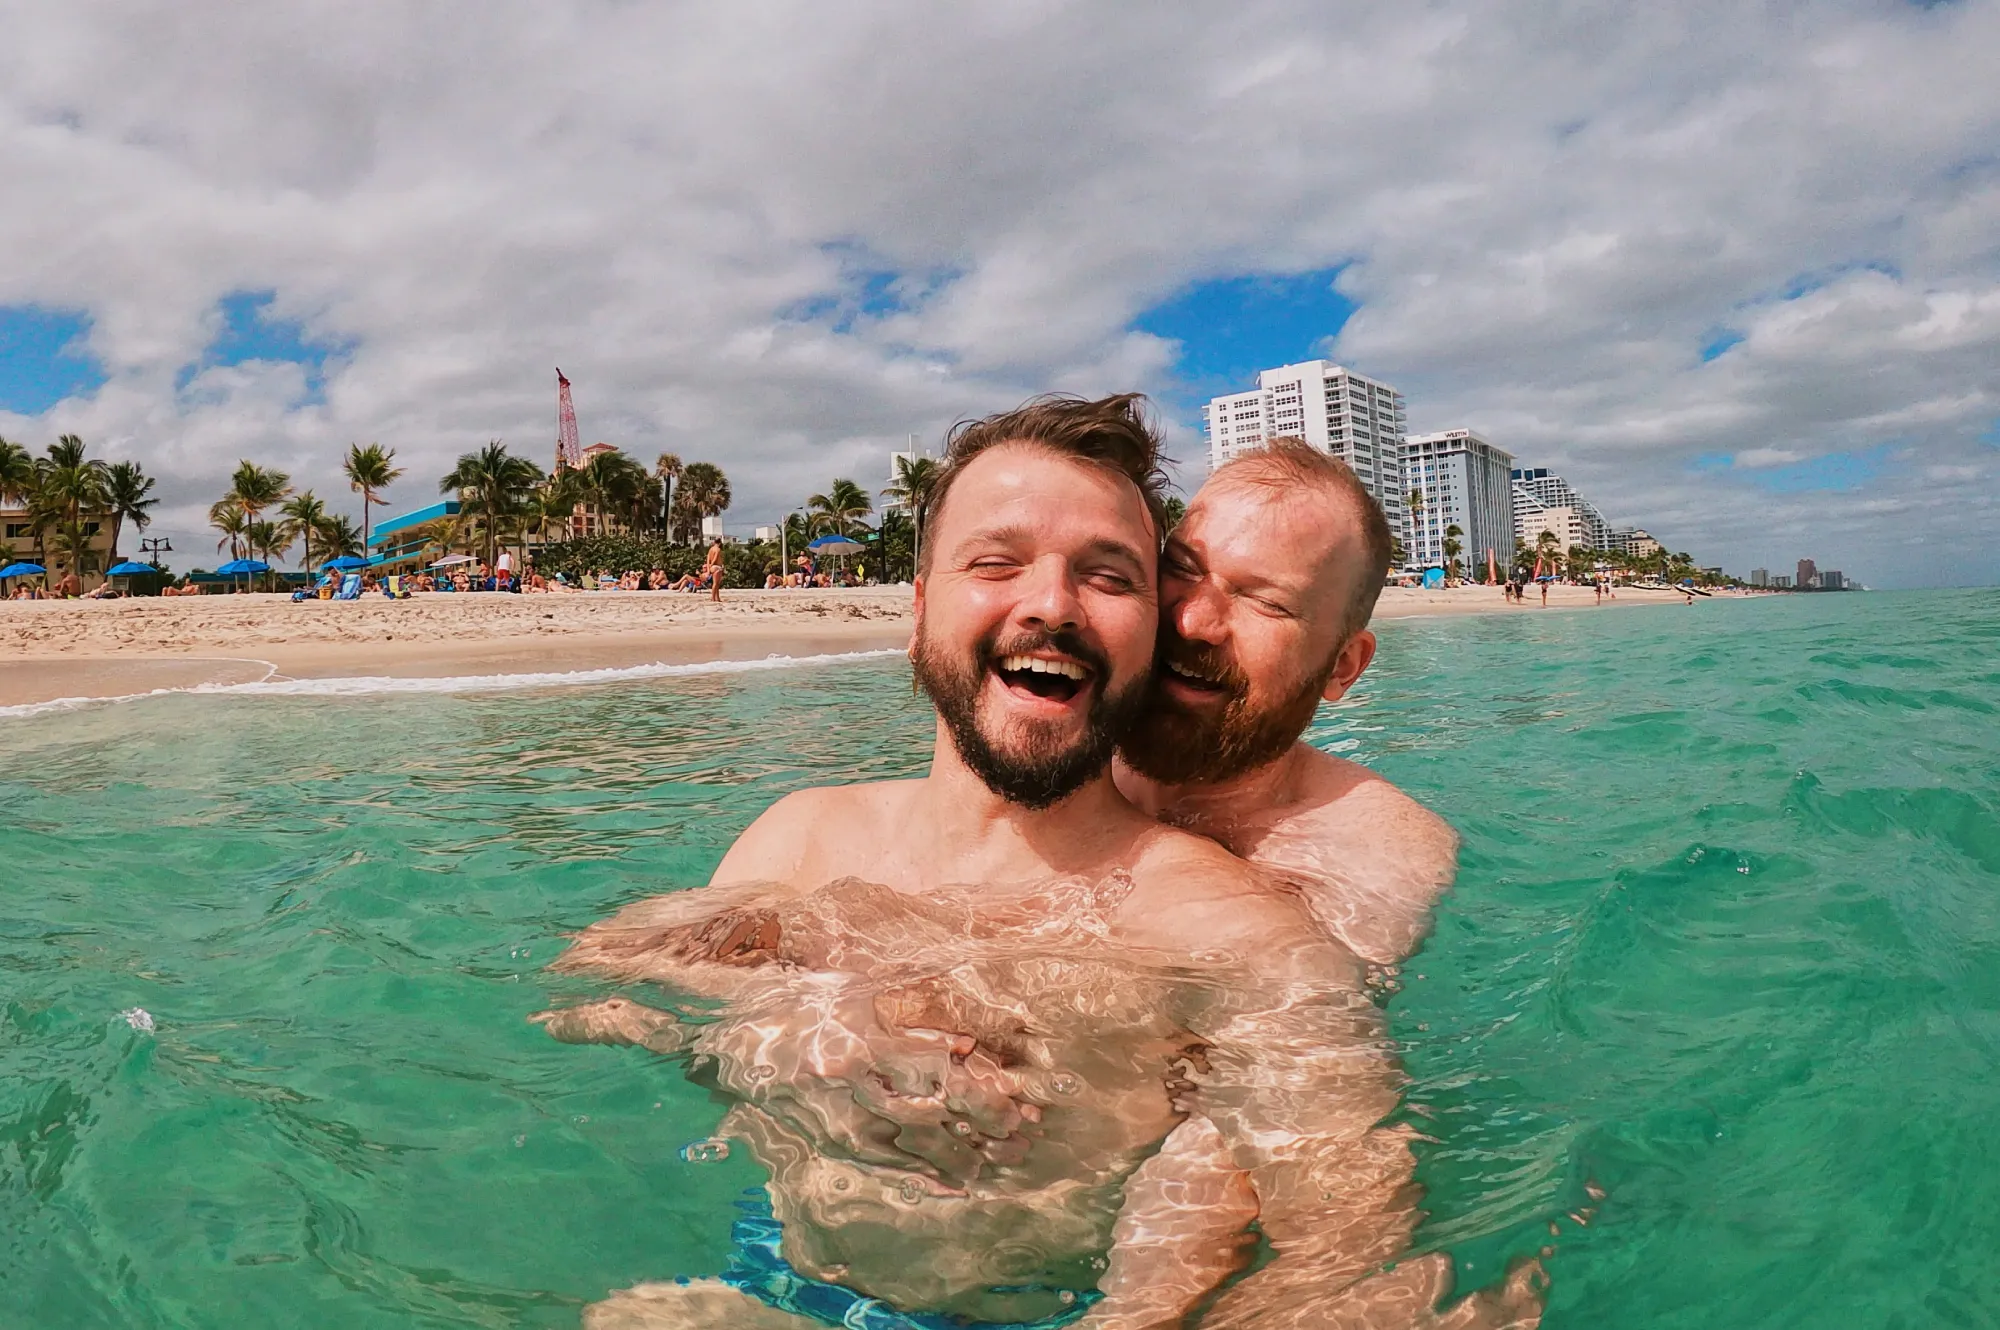 Fort Lauderdale – The Gay-friendly Venice of America in Florida